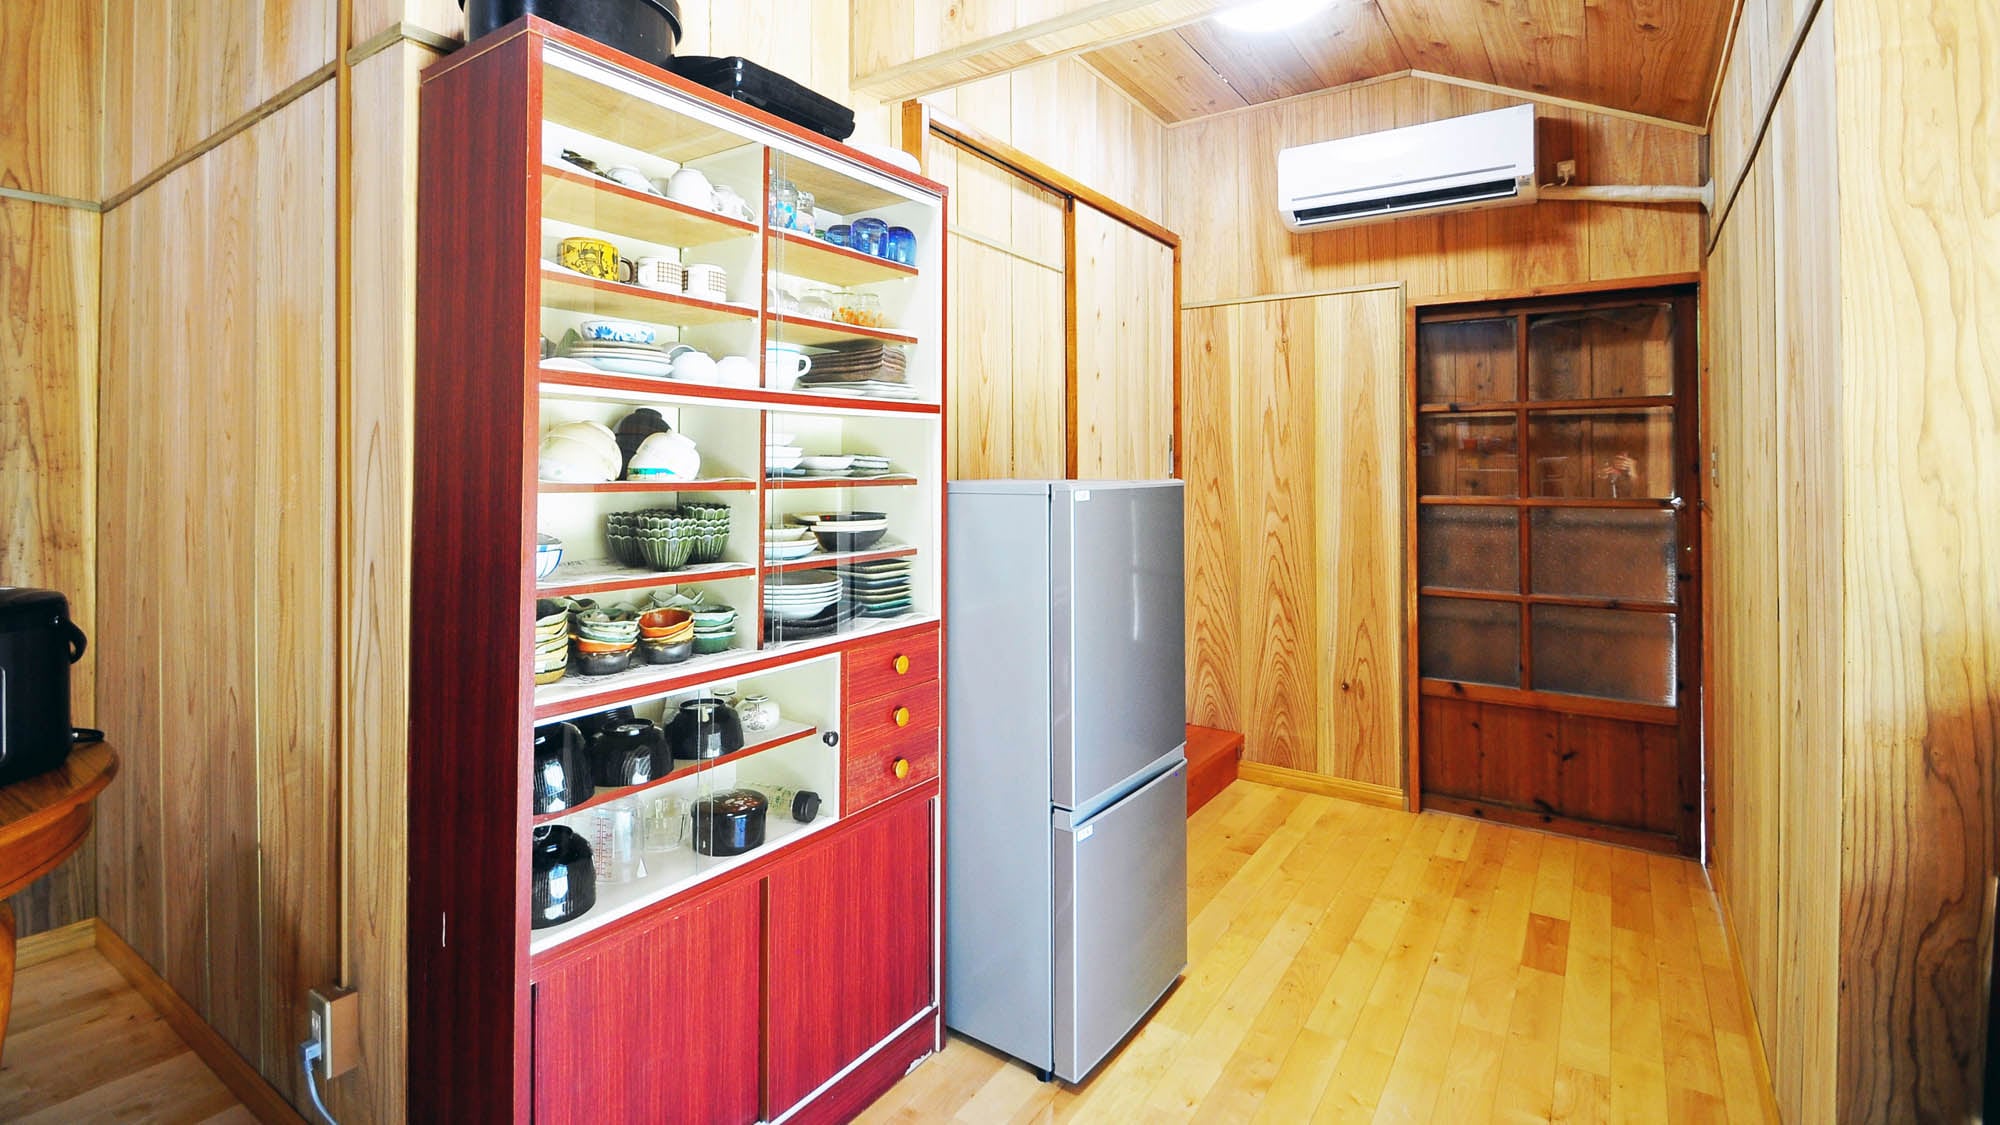 [Kitchen] There is also a refrigerator and cupboard so you can prepare your own meals.